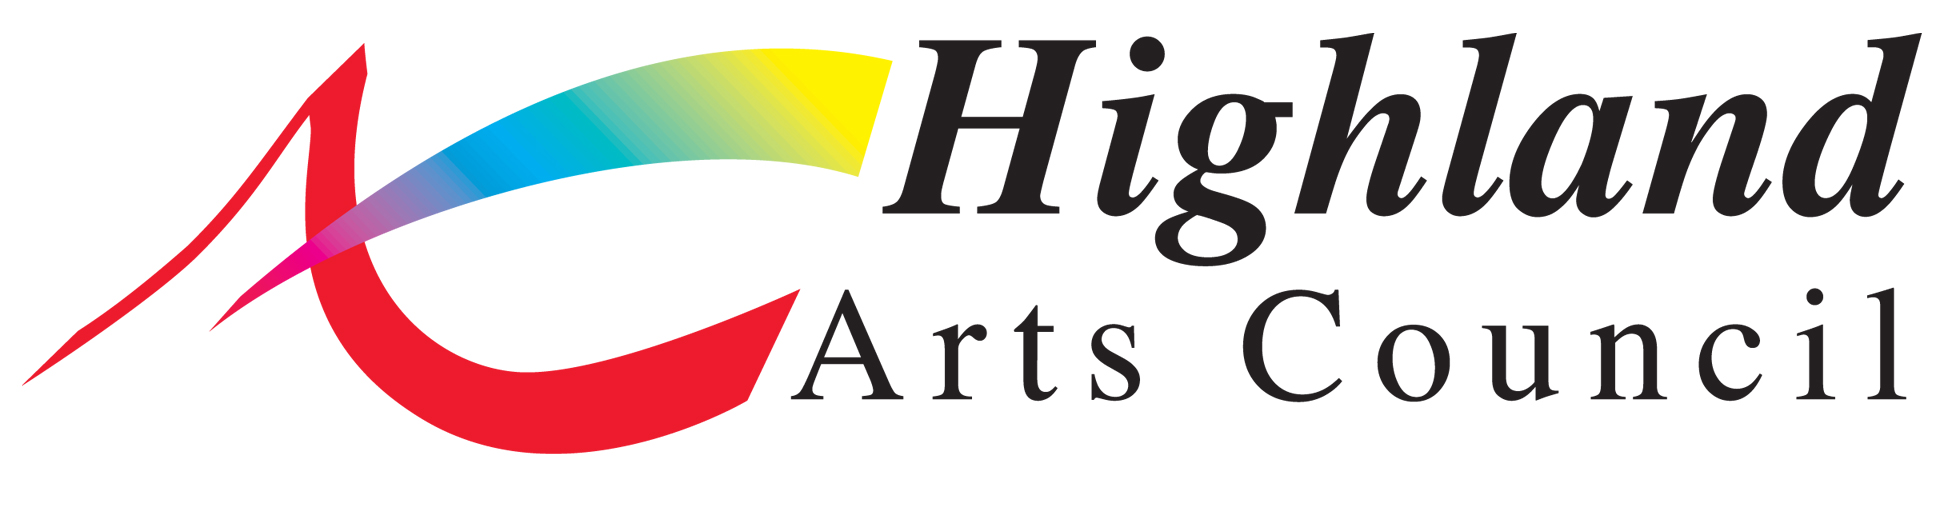 Image for Almaguin Highlands Arts Council